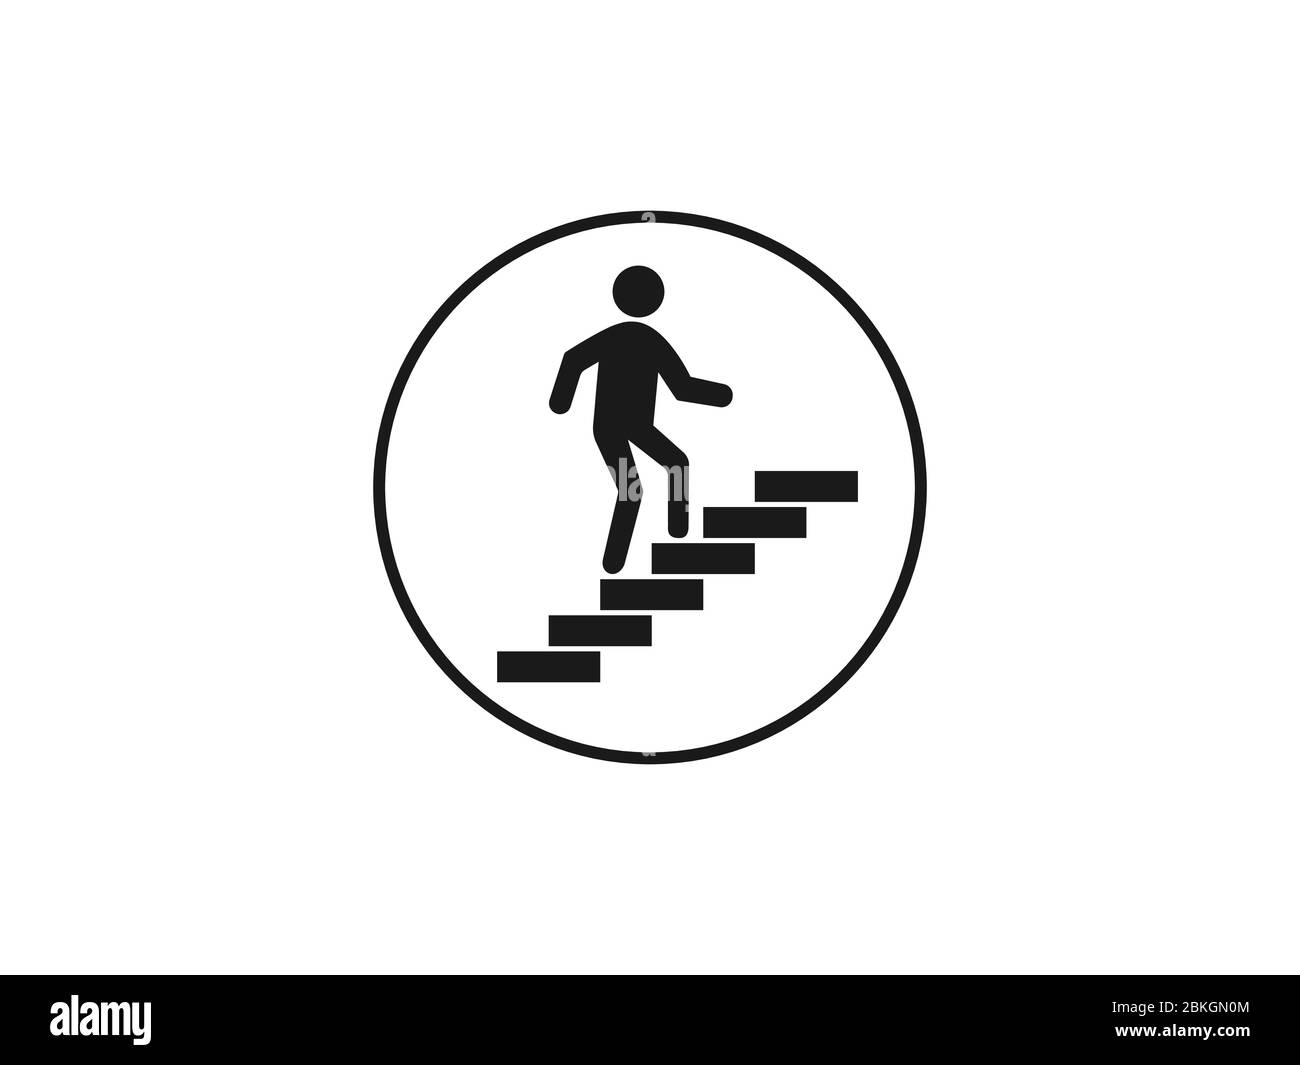 Stairs, stairwell, walks up icon. Vector illustration, flat design. Stock Vector